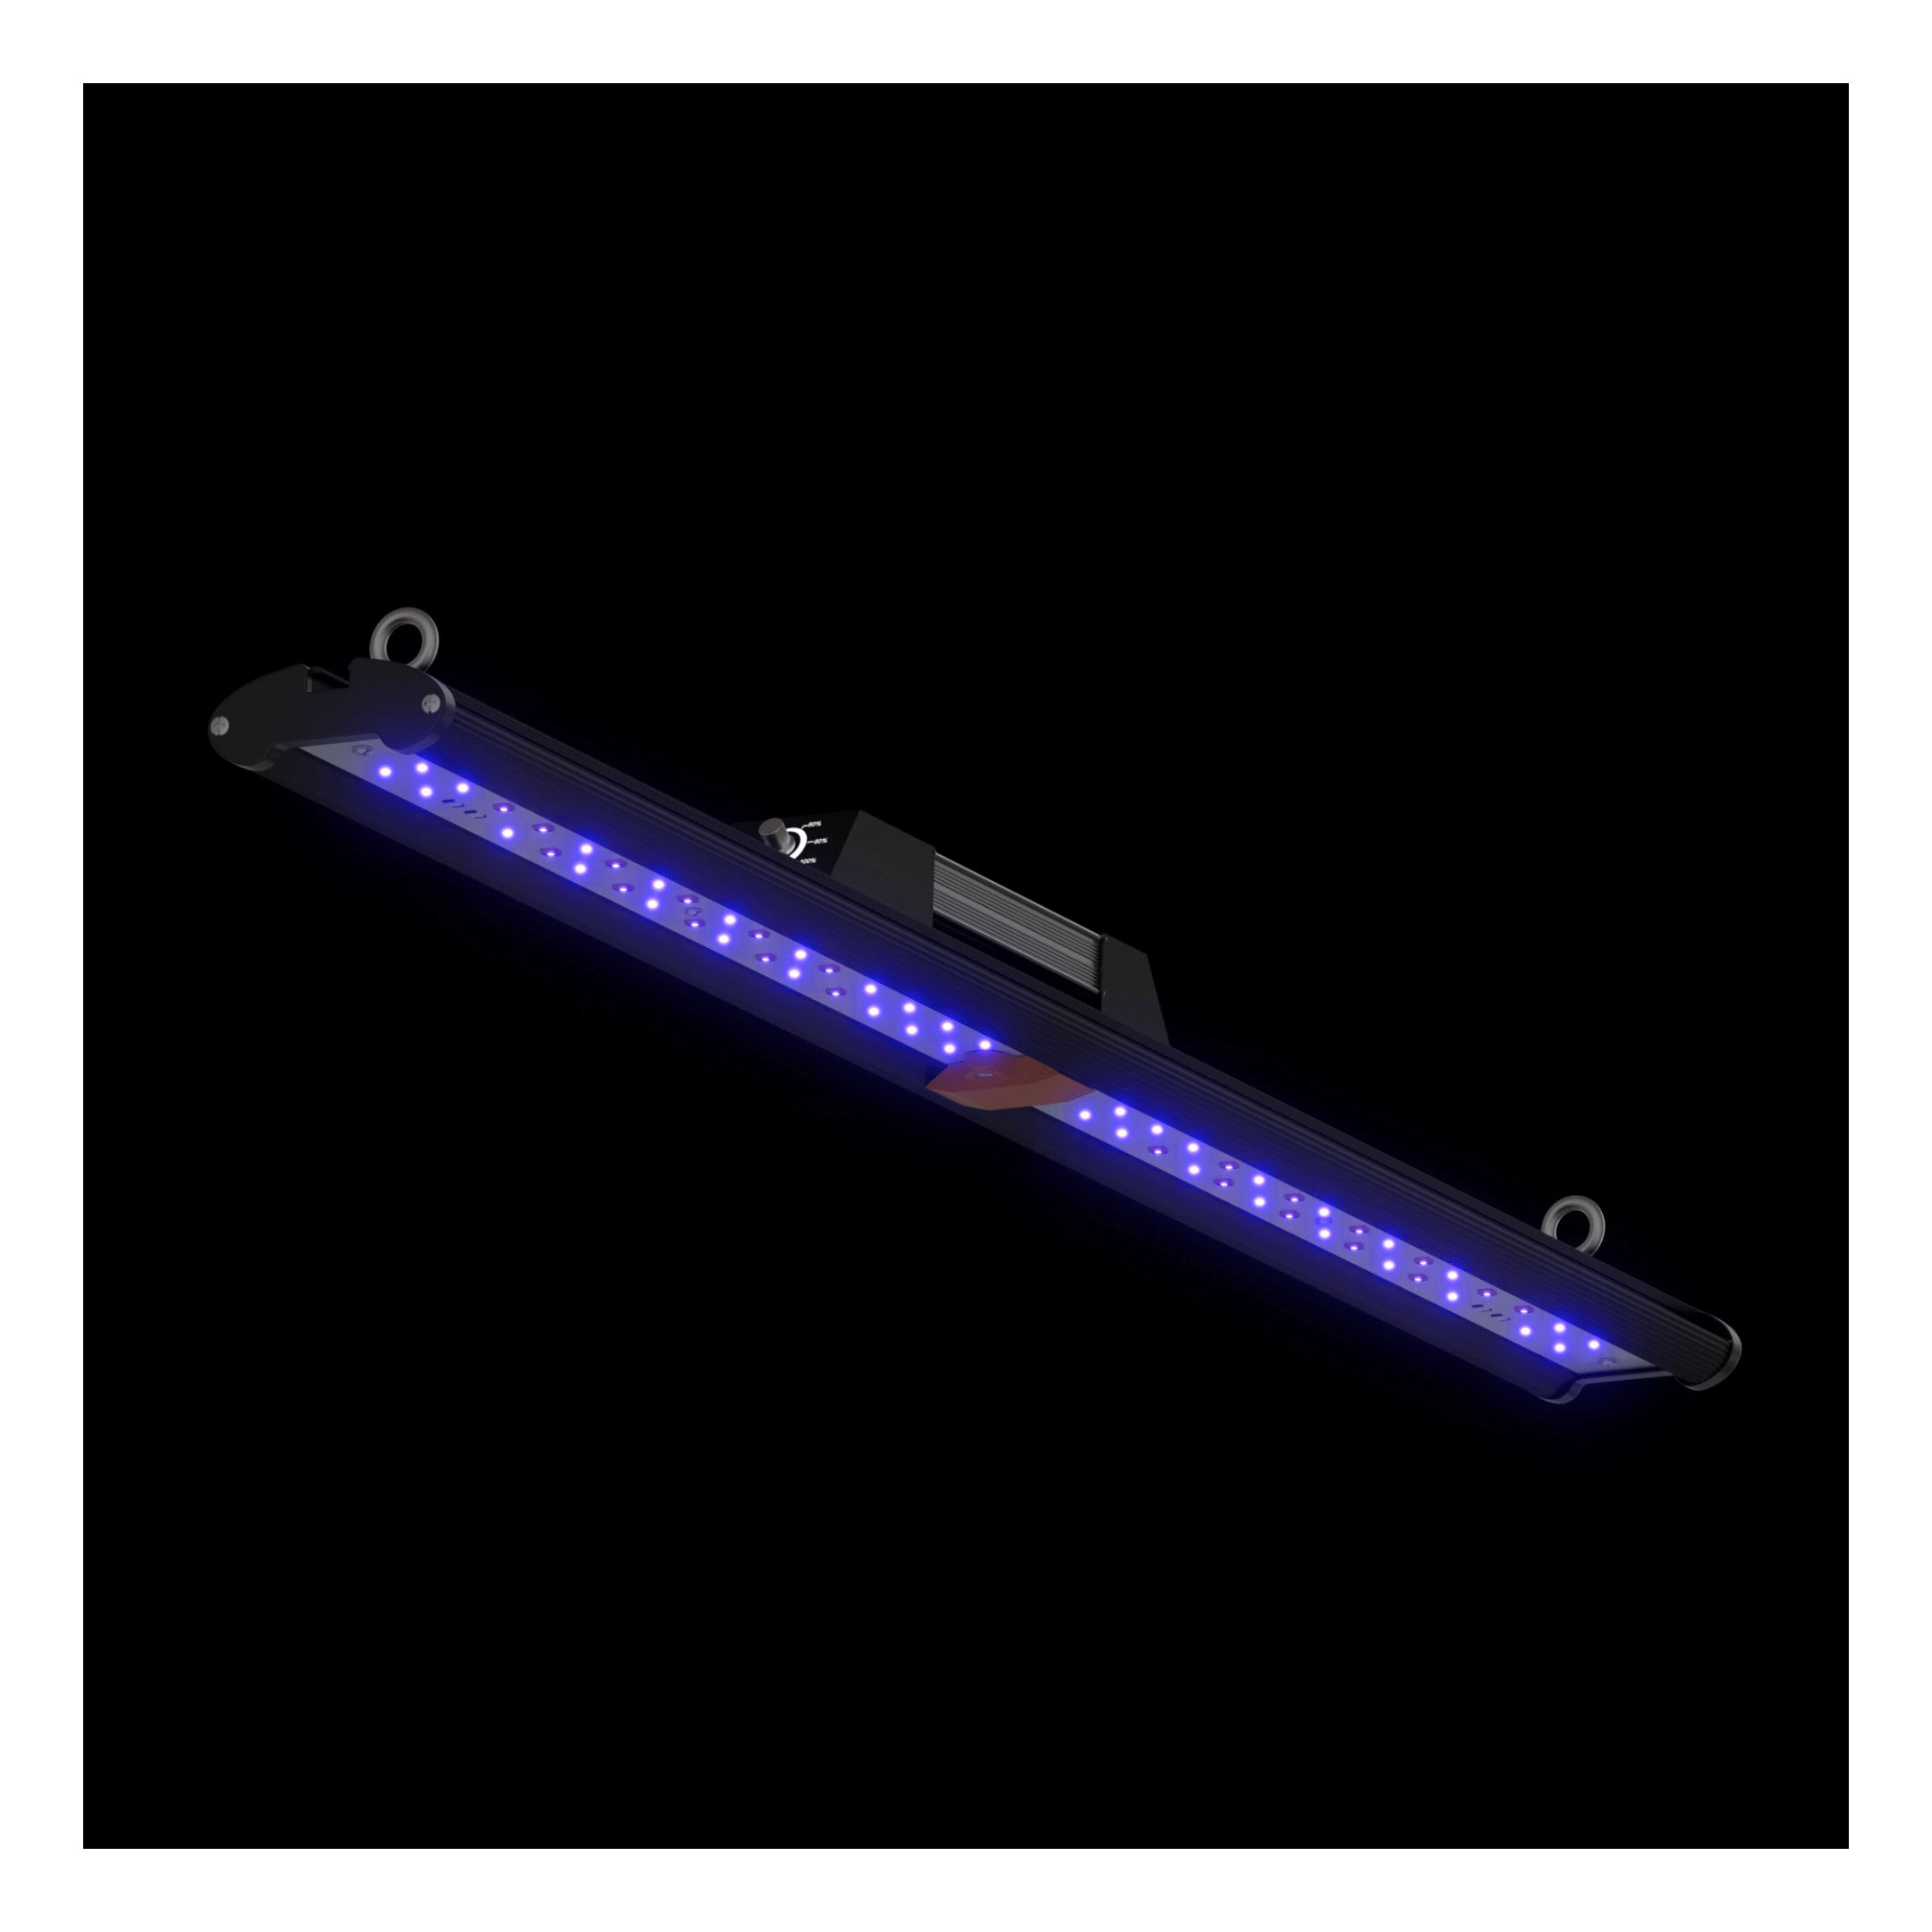 GLD Hydroponic Supplies > Lighting > LED Lights GLD Sabre UVA Light Bar (30W + 50W - Dimmable)